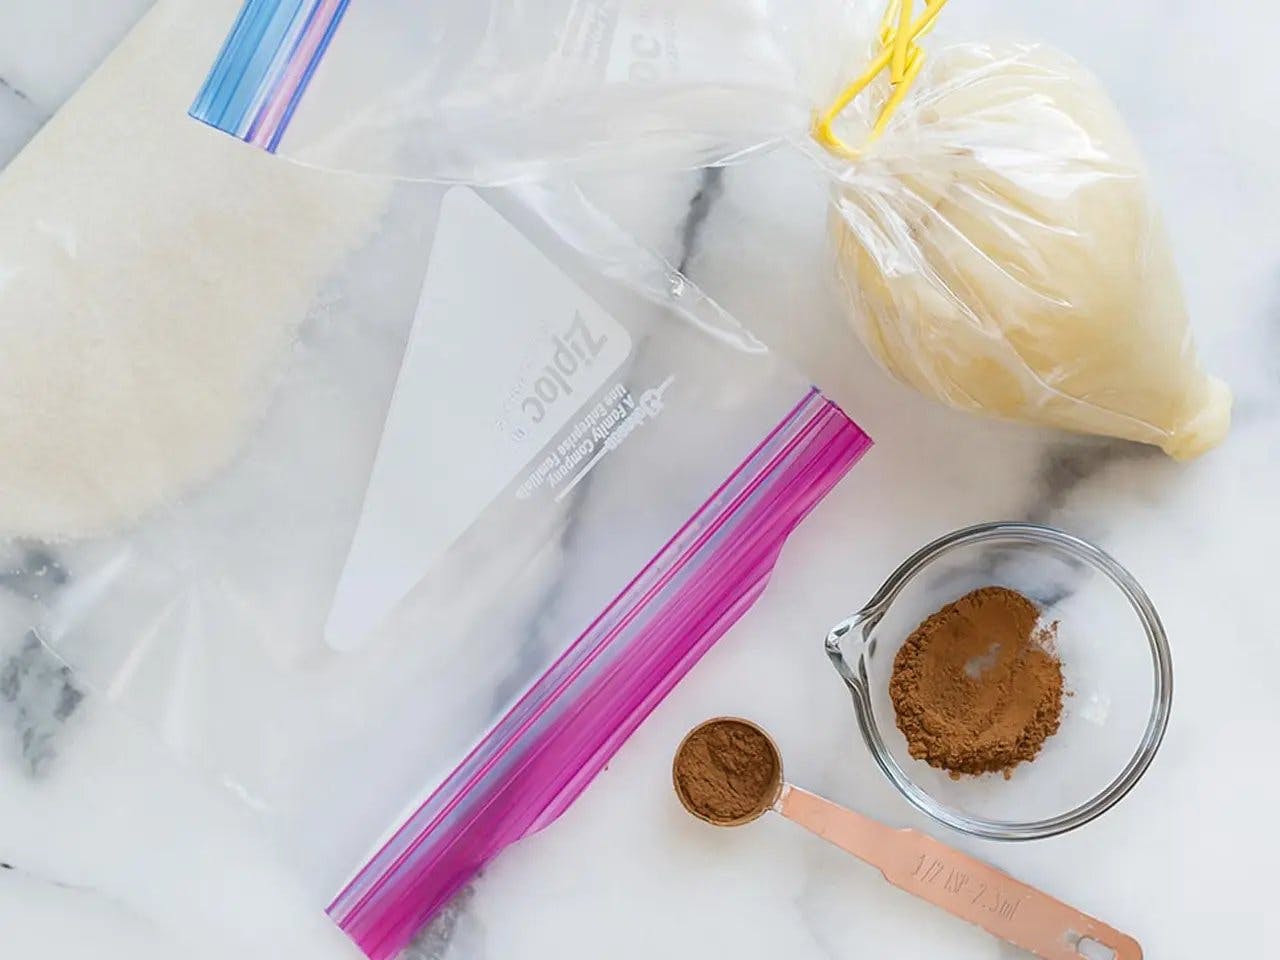 Ziploc bags filled with sugar and icing next to a teaspoon of cinnamon.